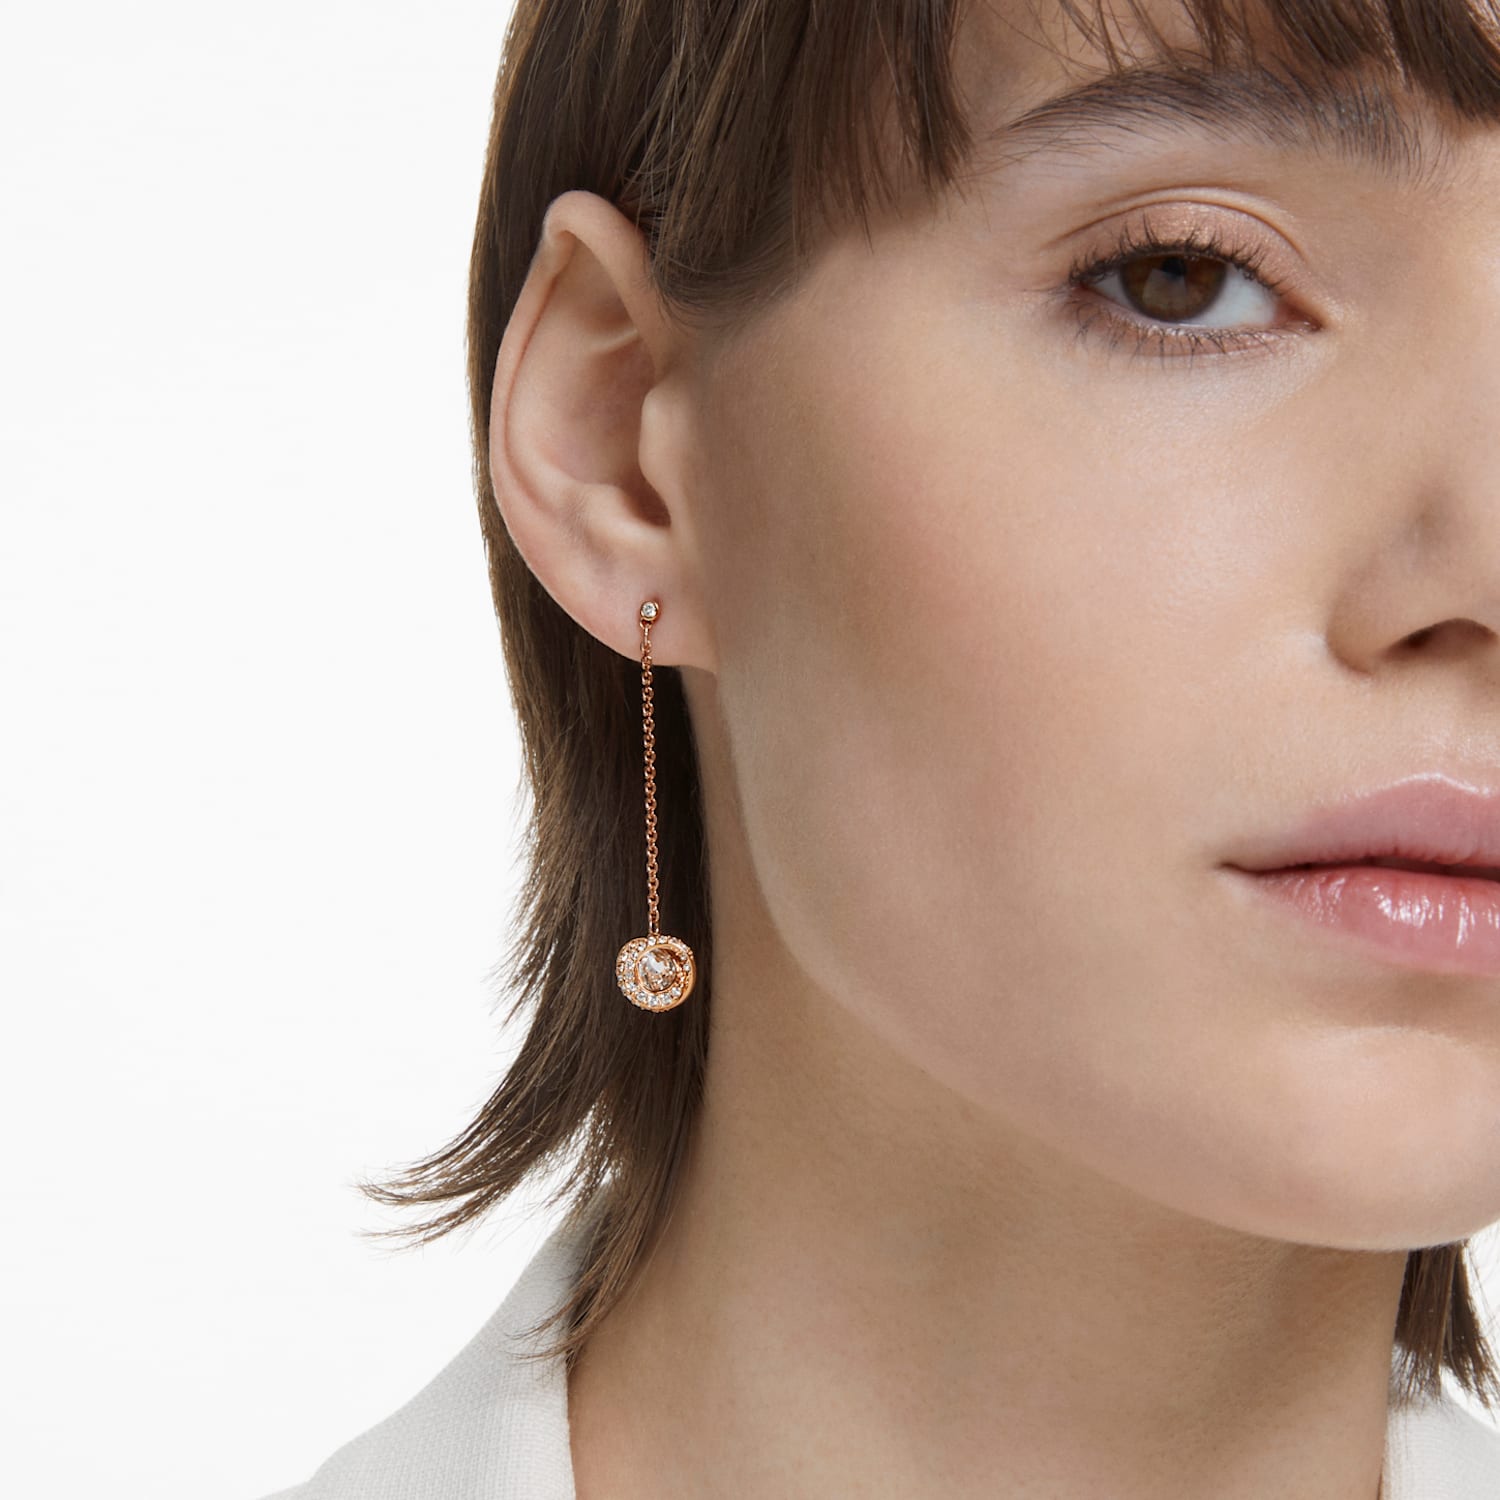 Generation drop earrings, Long, White, Rose gold-tone plated